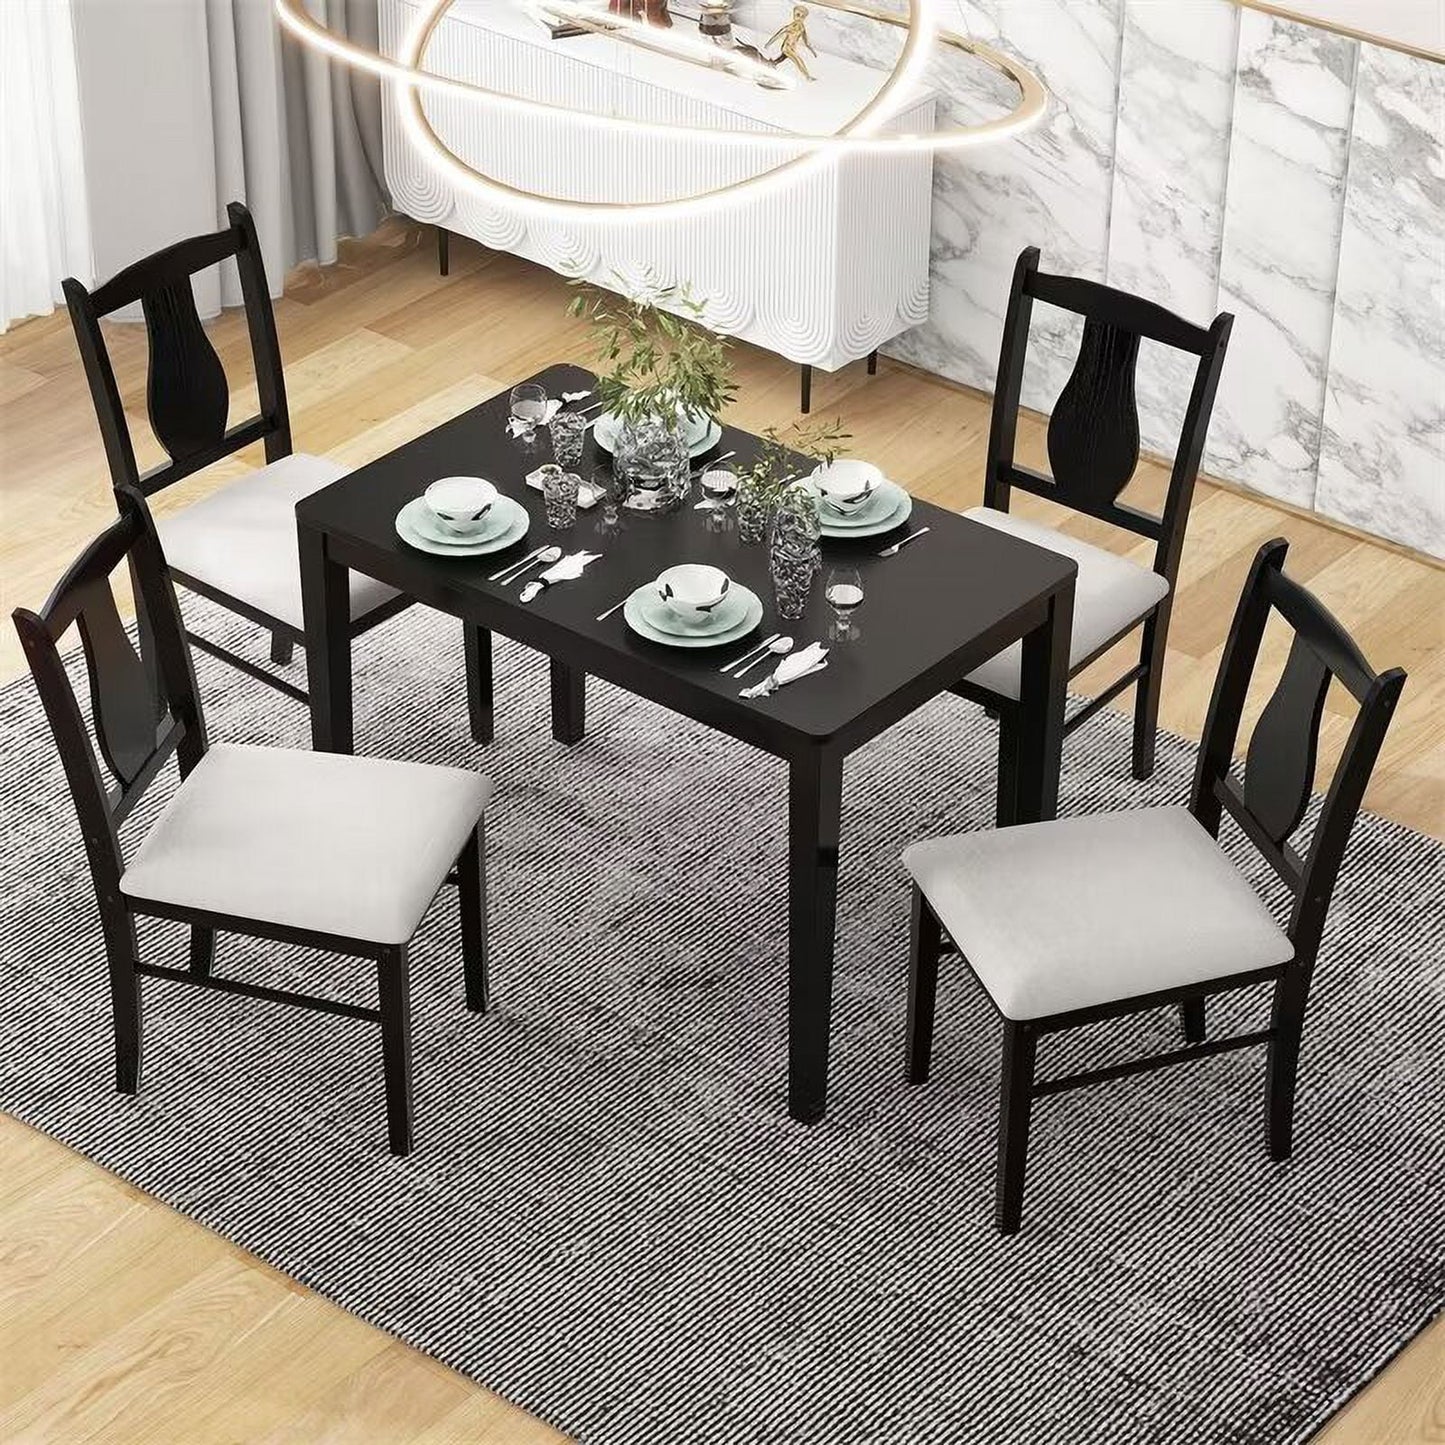 5-Piece Dining Table Set, Wooden Rectangular Dining Table and 4 Upholstered Chairs Farmhouse Dining Set for Kitchen and Dining Room, Natural